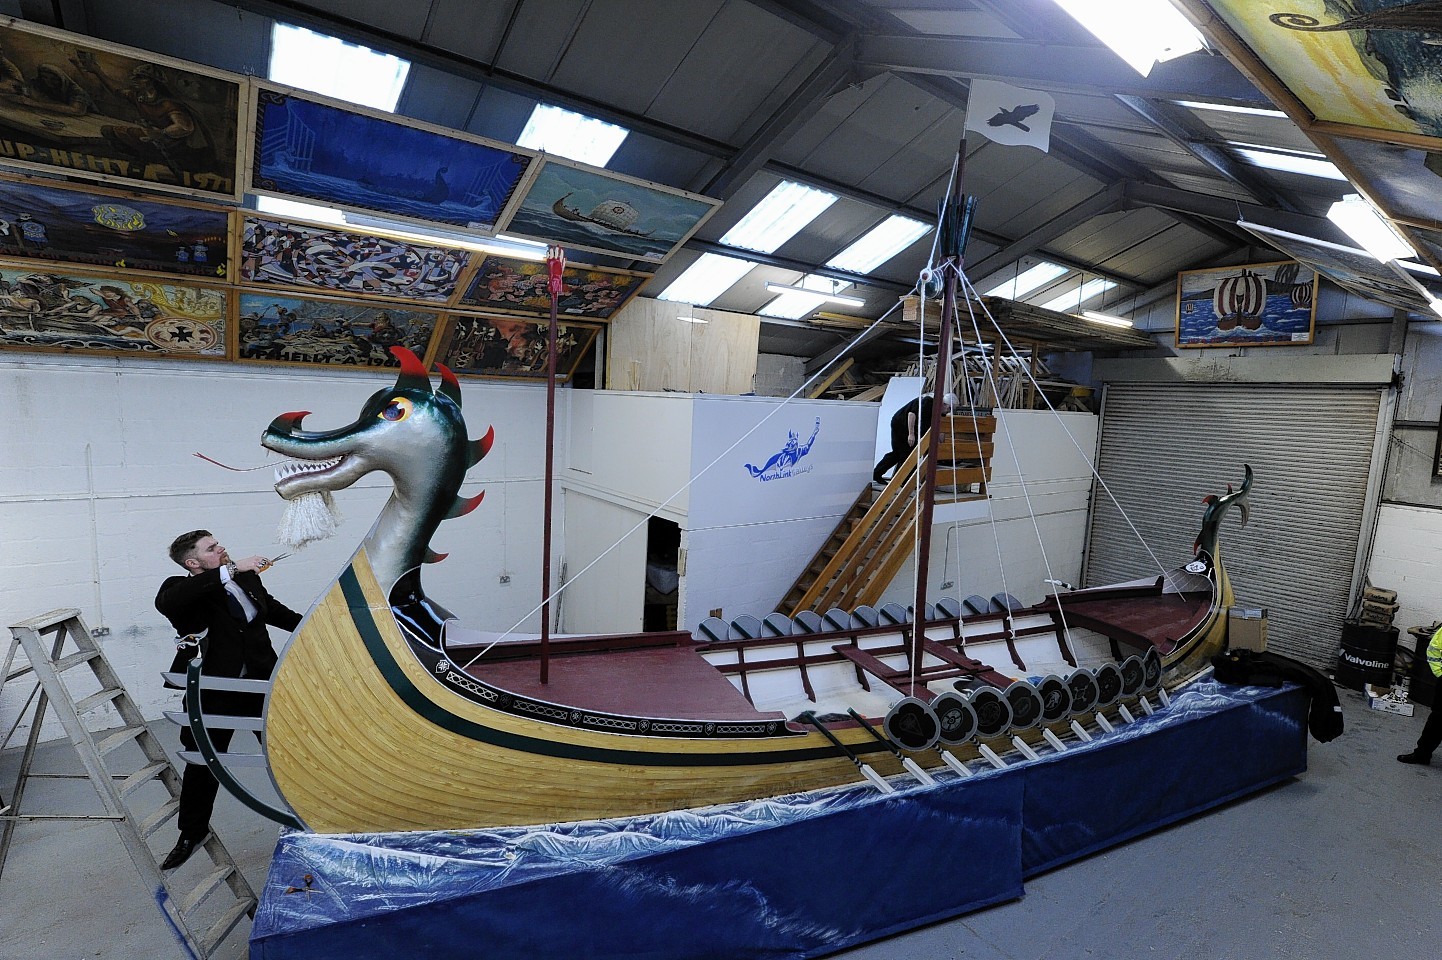 Preparations for Up Helly Aa in Shetland as it gets under way (pictures by Kenny Elrick)